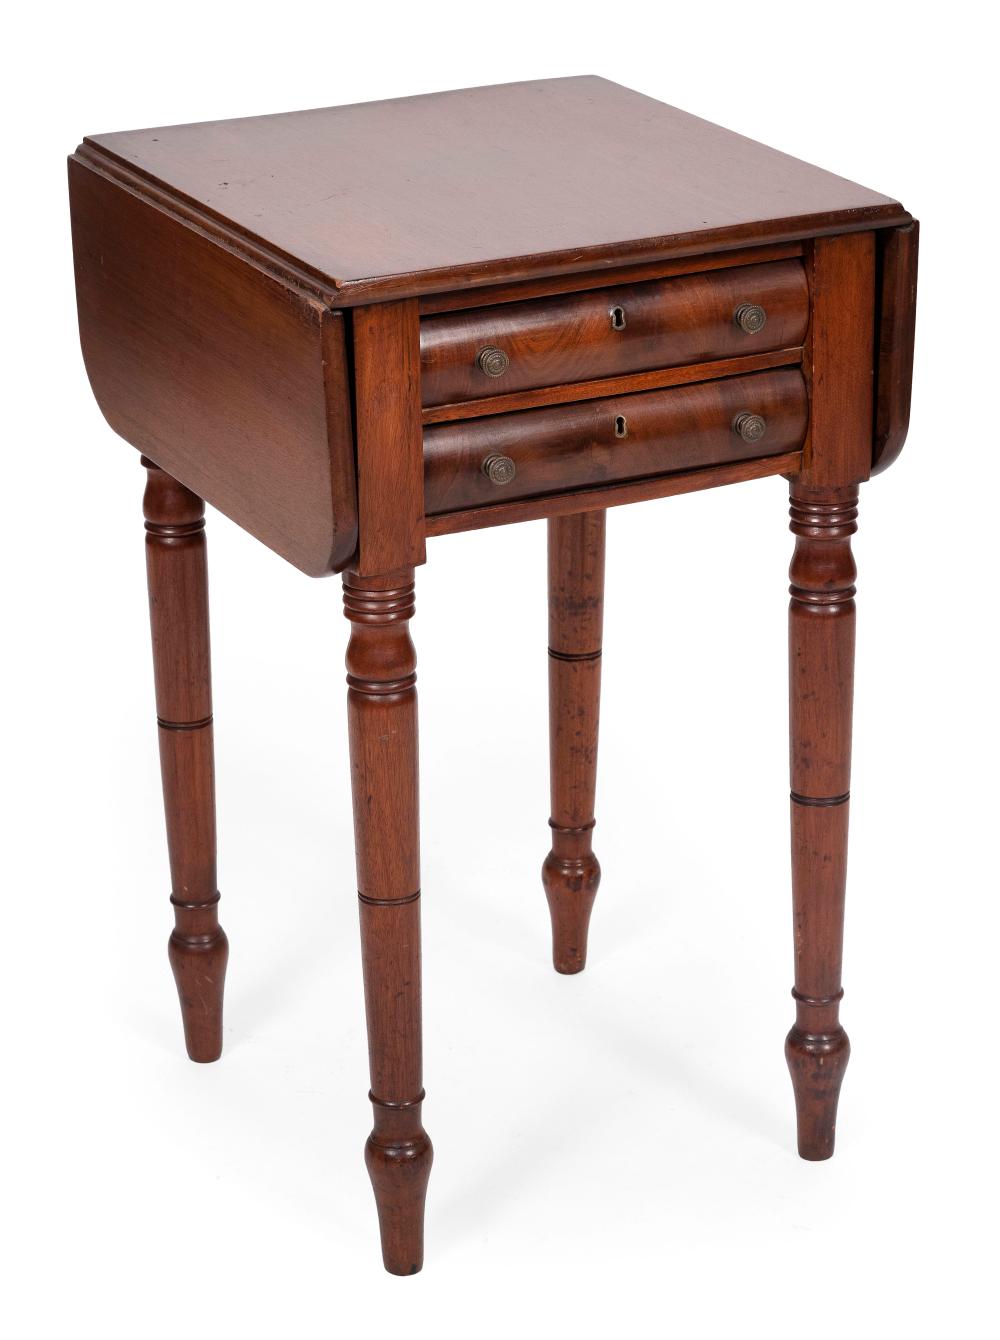 SHERATON TWO-DRAWER DROP-LEAF STAND